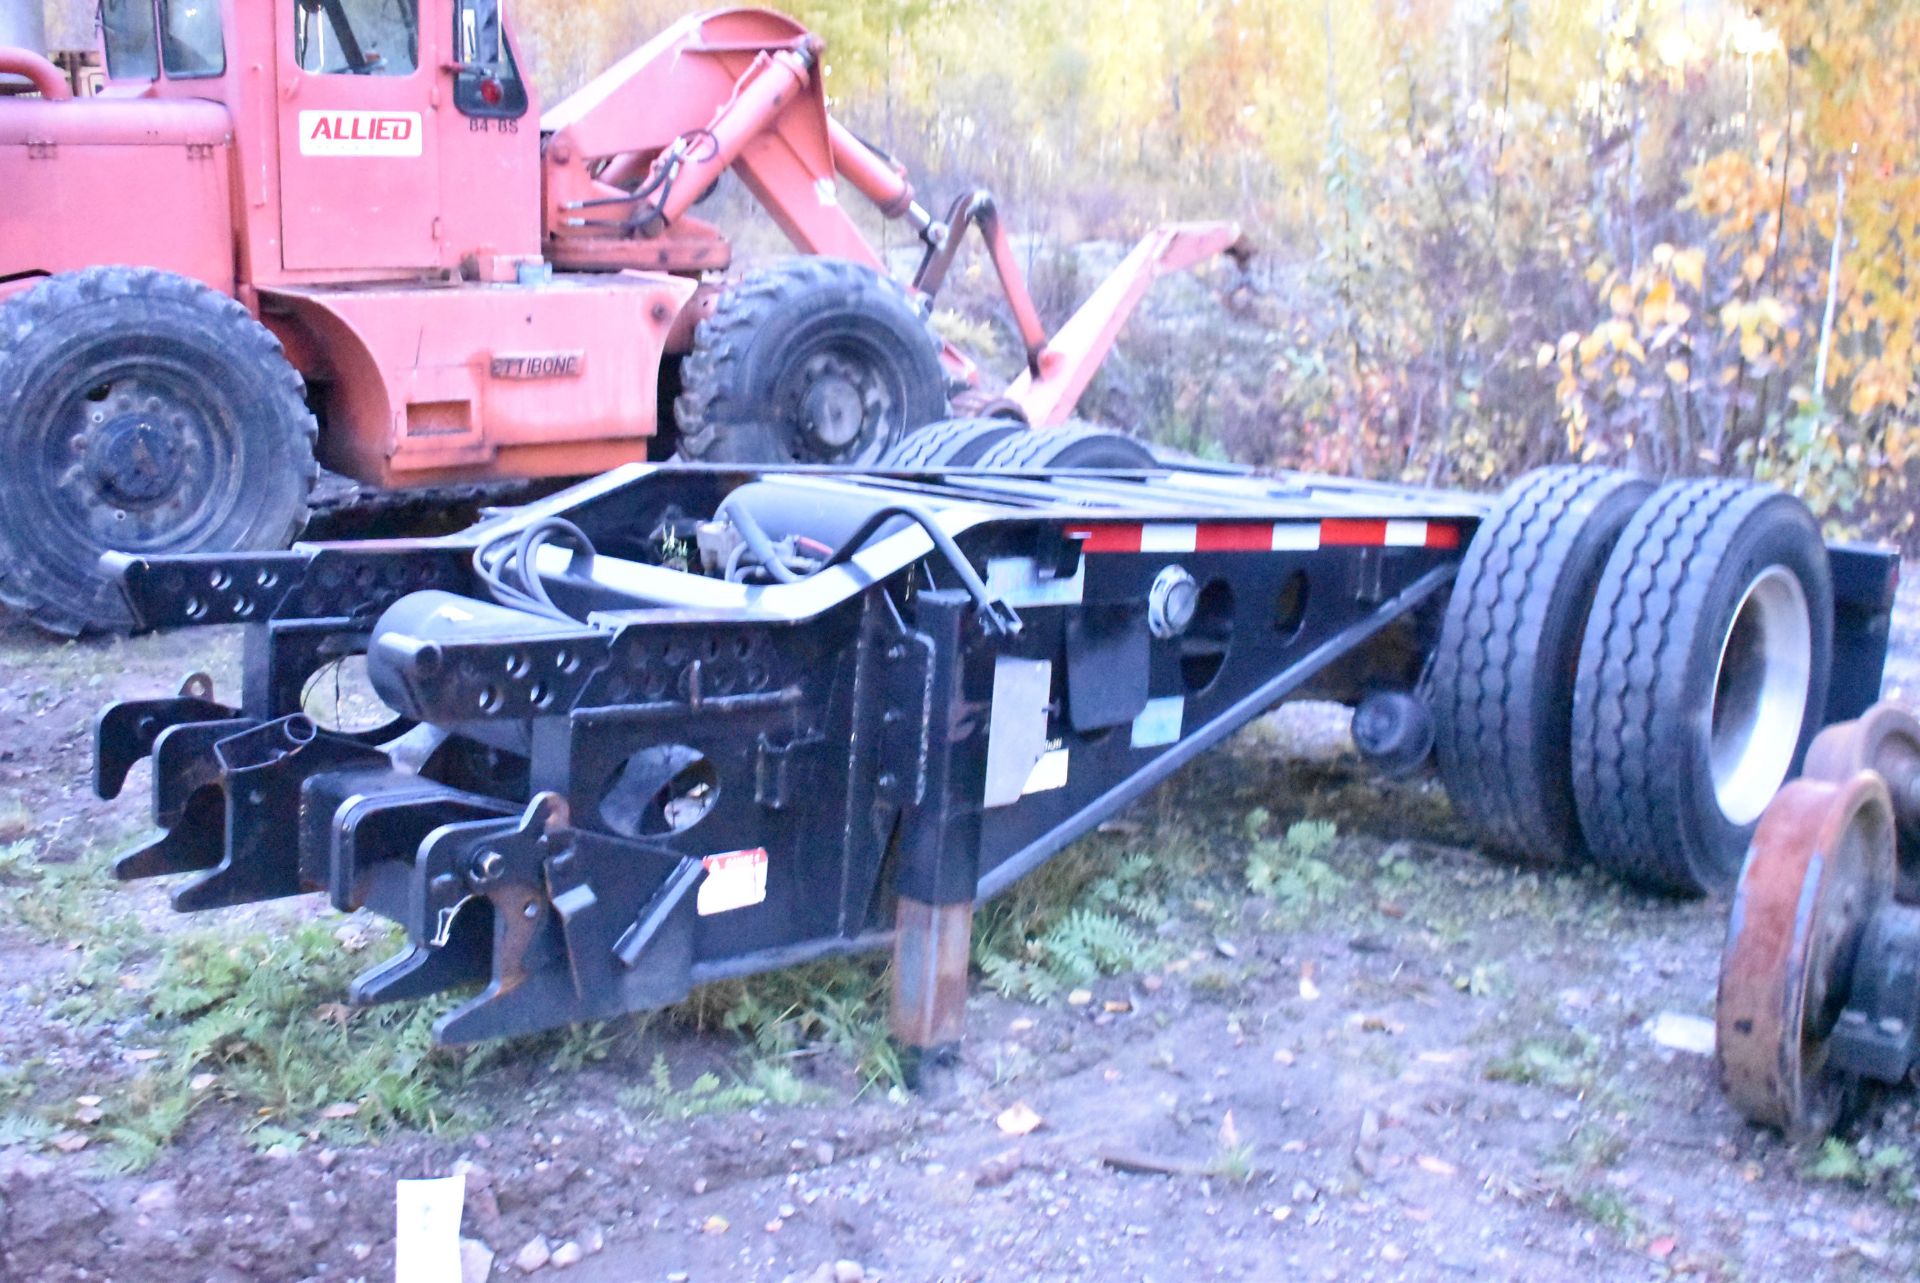 MAGNUM (2007) BOOSTER AXLE, VIN 2P9BD16697A015478 (814) (LOCATED AT 1891 SEYMOUR ST, NORTH BAY, ON) - Image 3 of 7